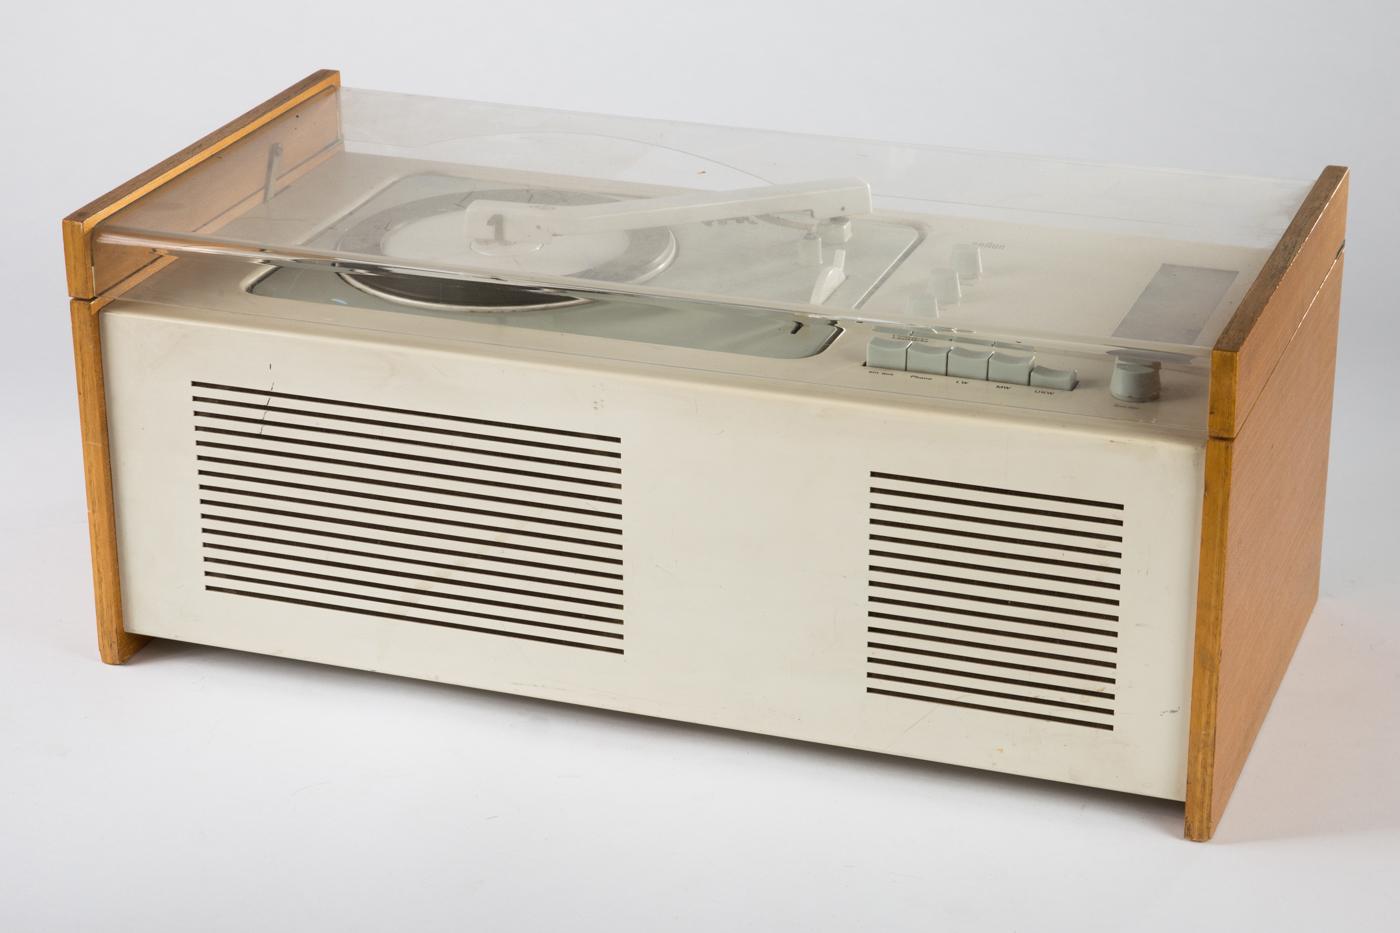 SK61 Record Player designed by Dieter Rams and Hans Gugelot for Braun, 1966. The radio-phonograph combination is in excellent cosmetic condition, and full working order. 
It has a four speed record player, 78, 45, 33, 16 rpm. The tube radio picks